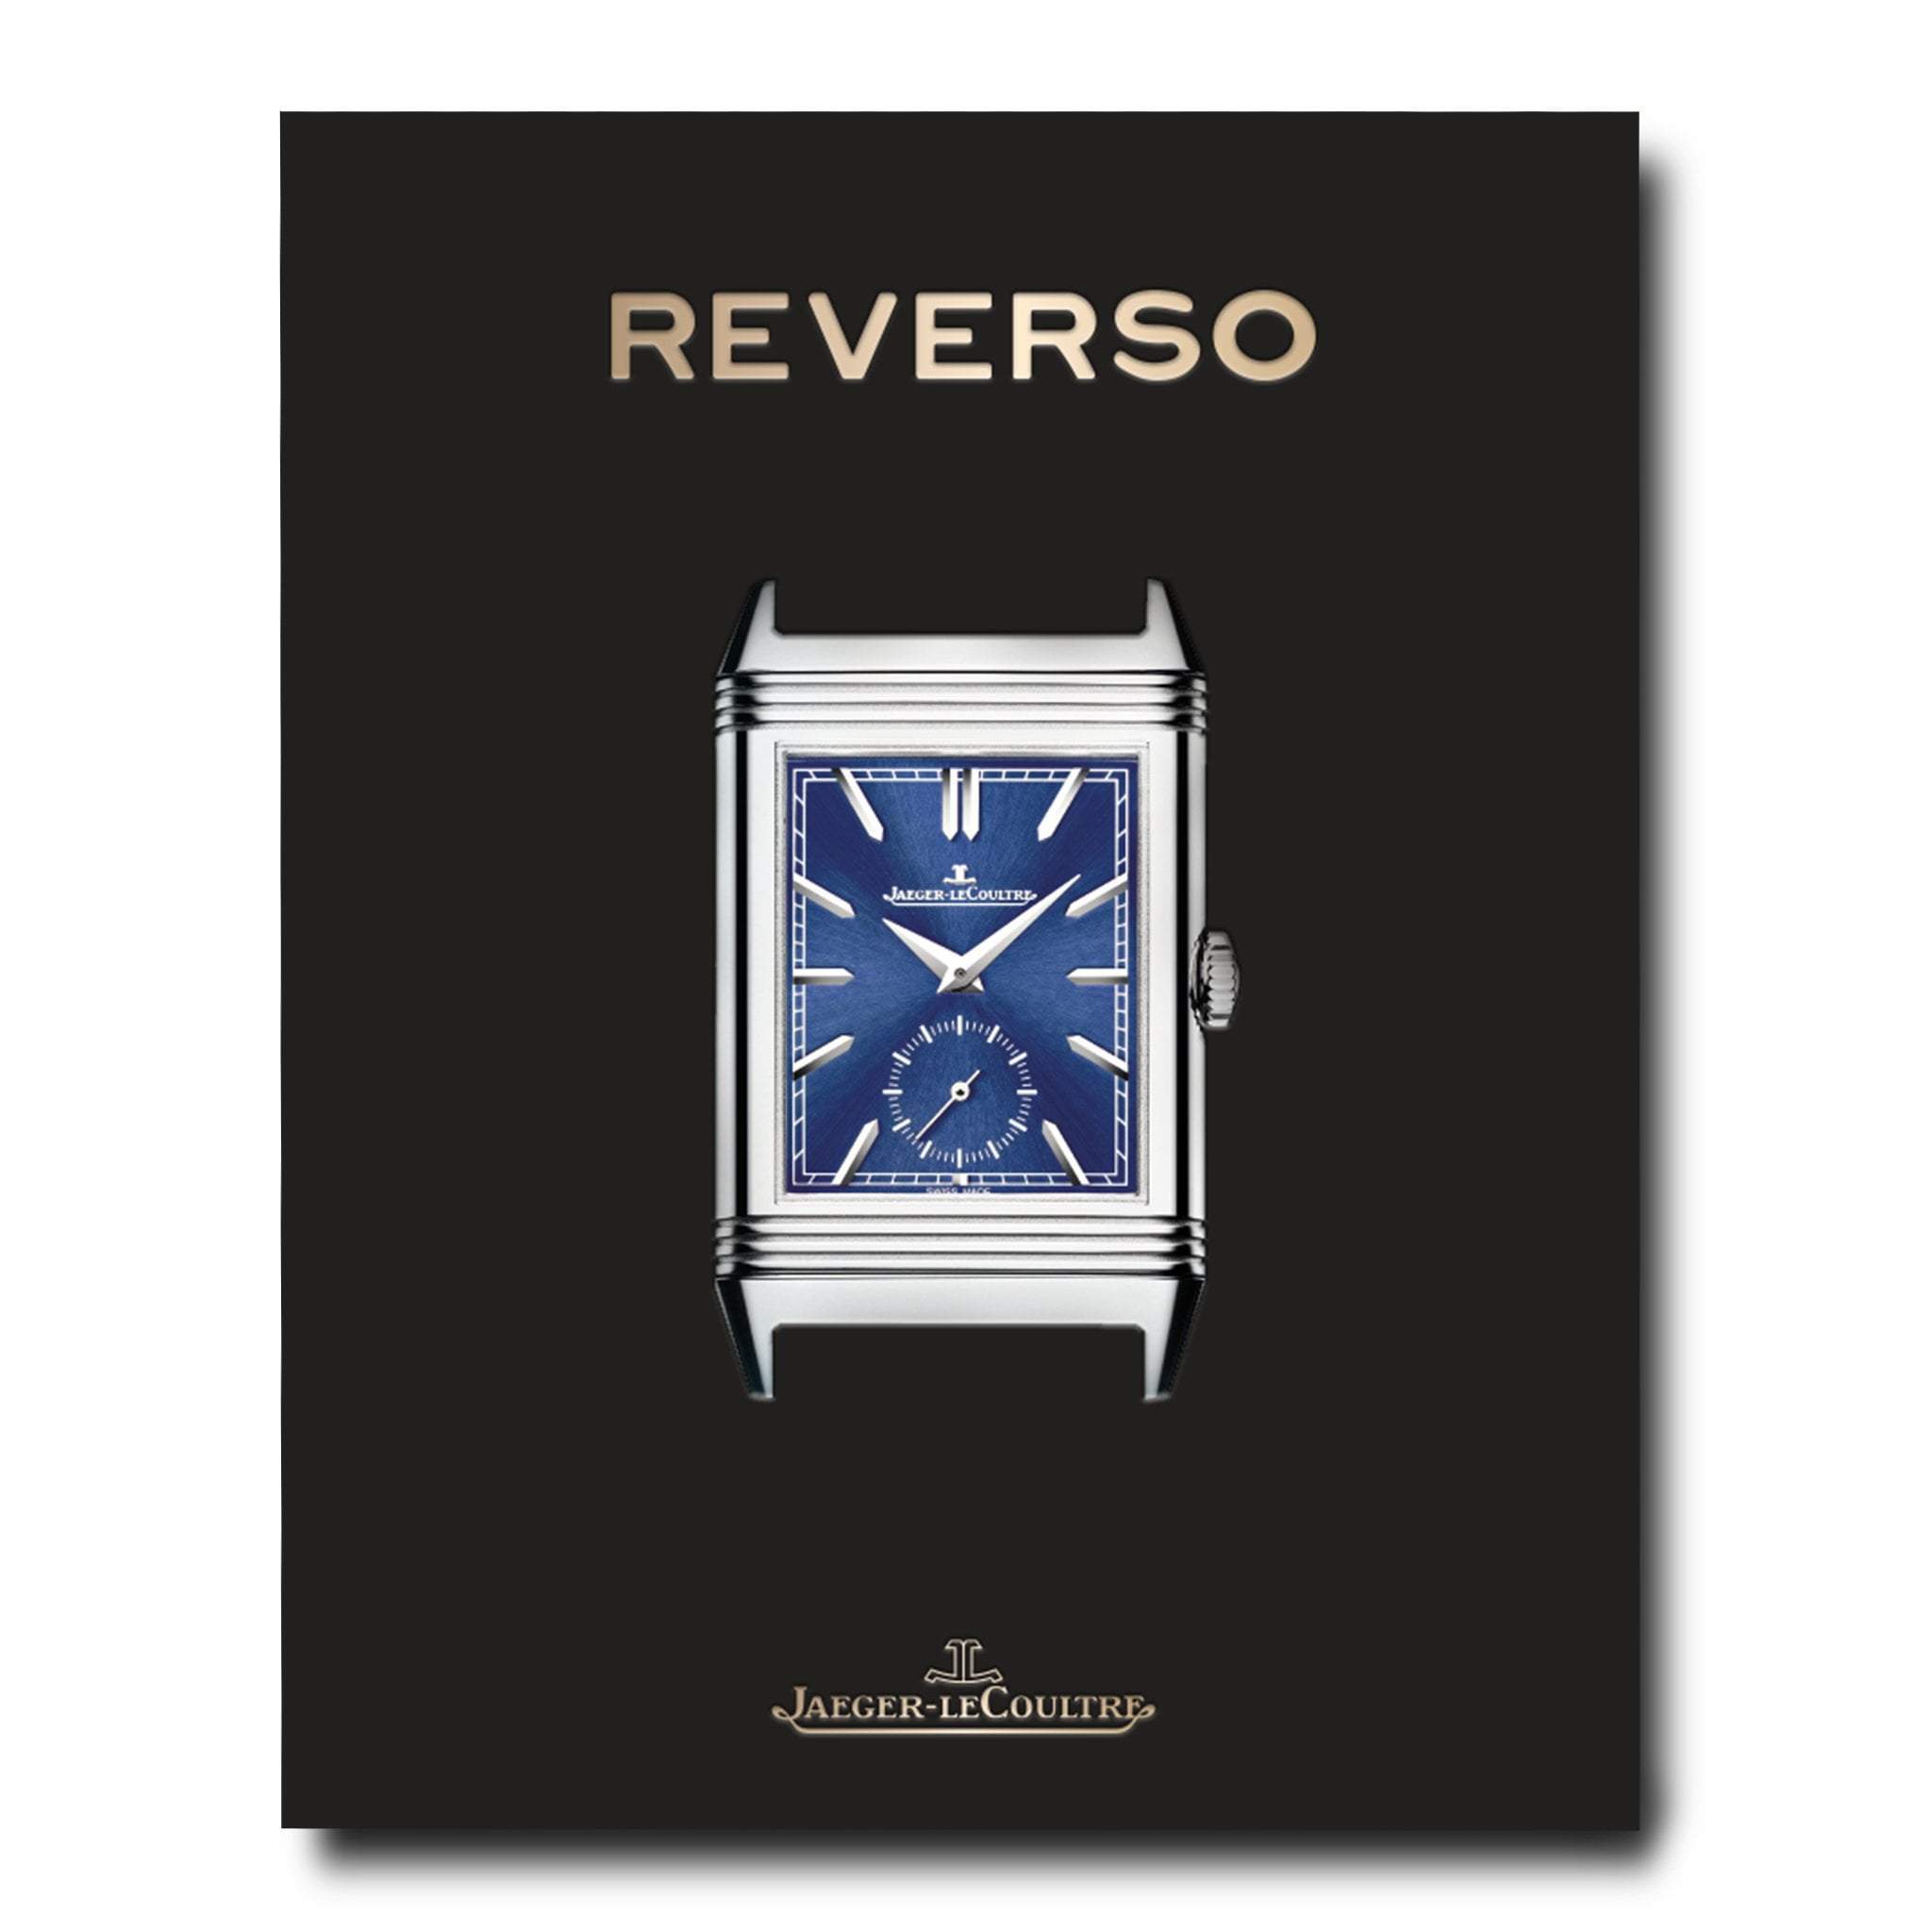 Jaeger-LeCoultre Reverso the architecture under king ludwig ii